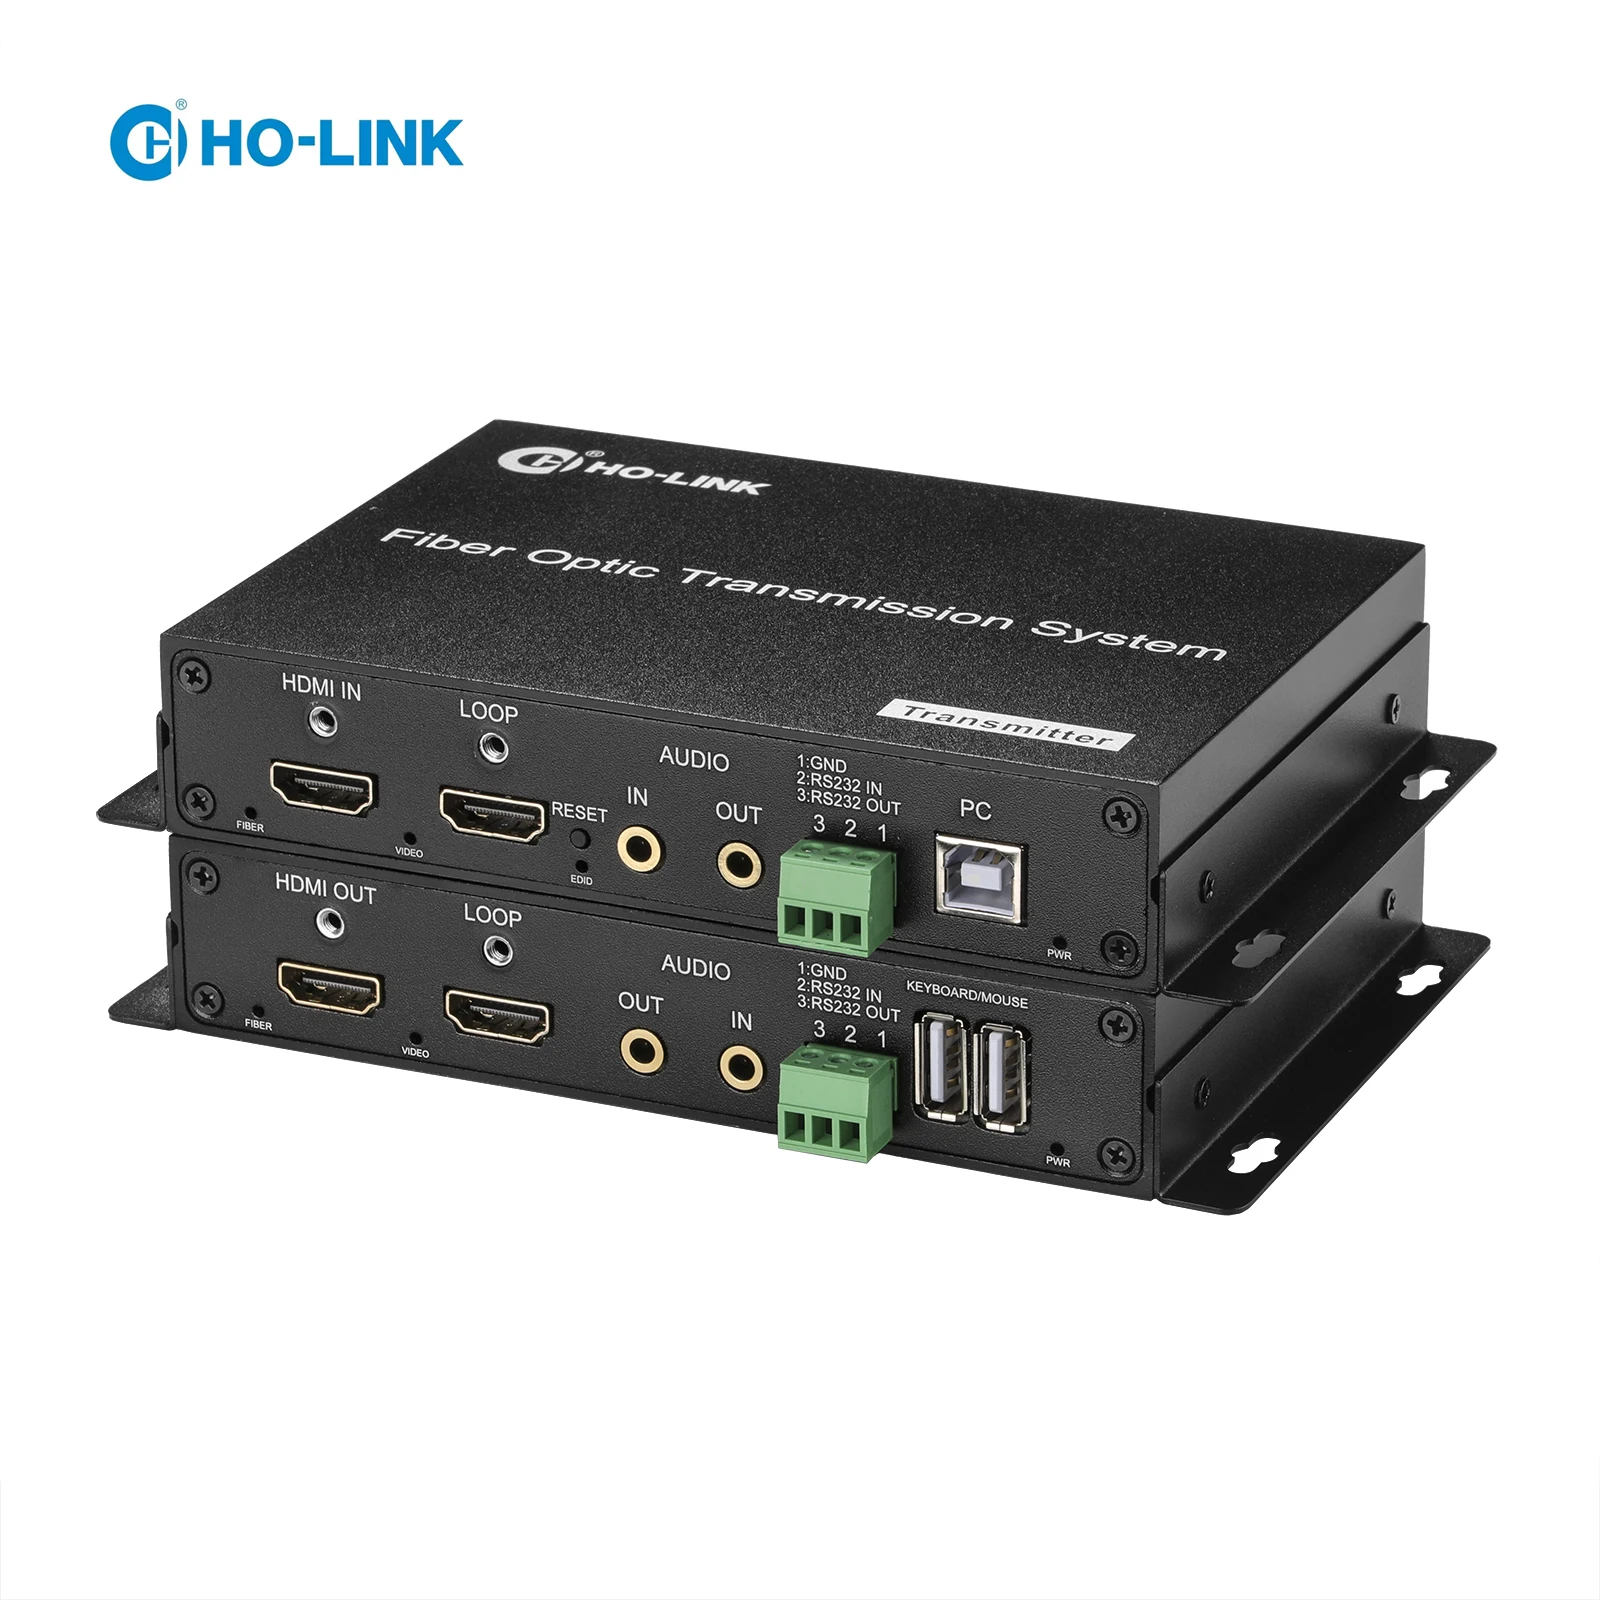 4K@60HZ HDMI to Fiber Optic Converter with KVM/data/Audio Extender with Loop Out Over LC Optic Fiber Cable